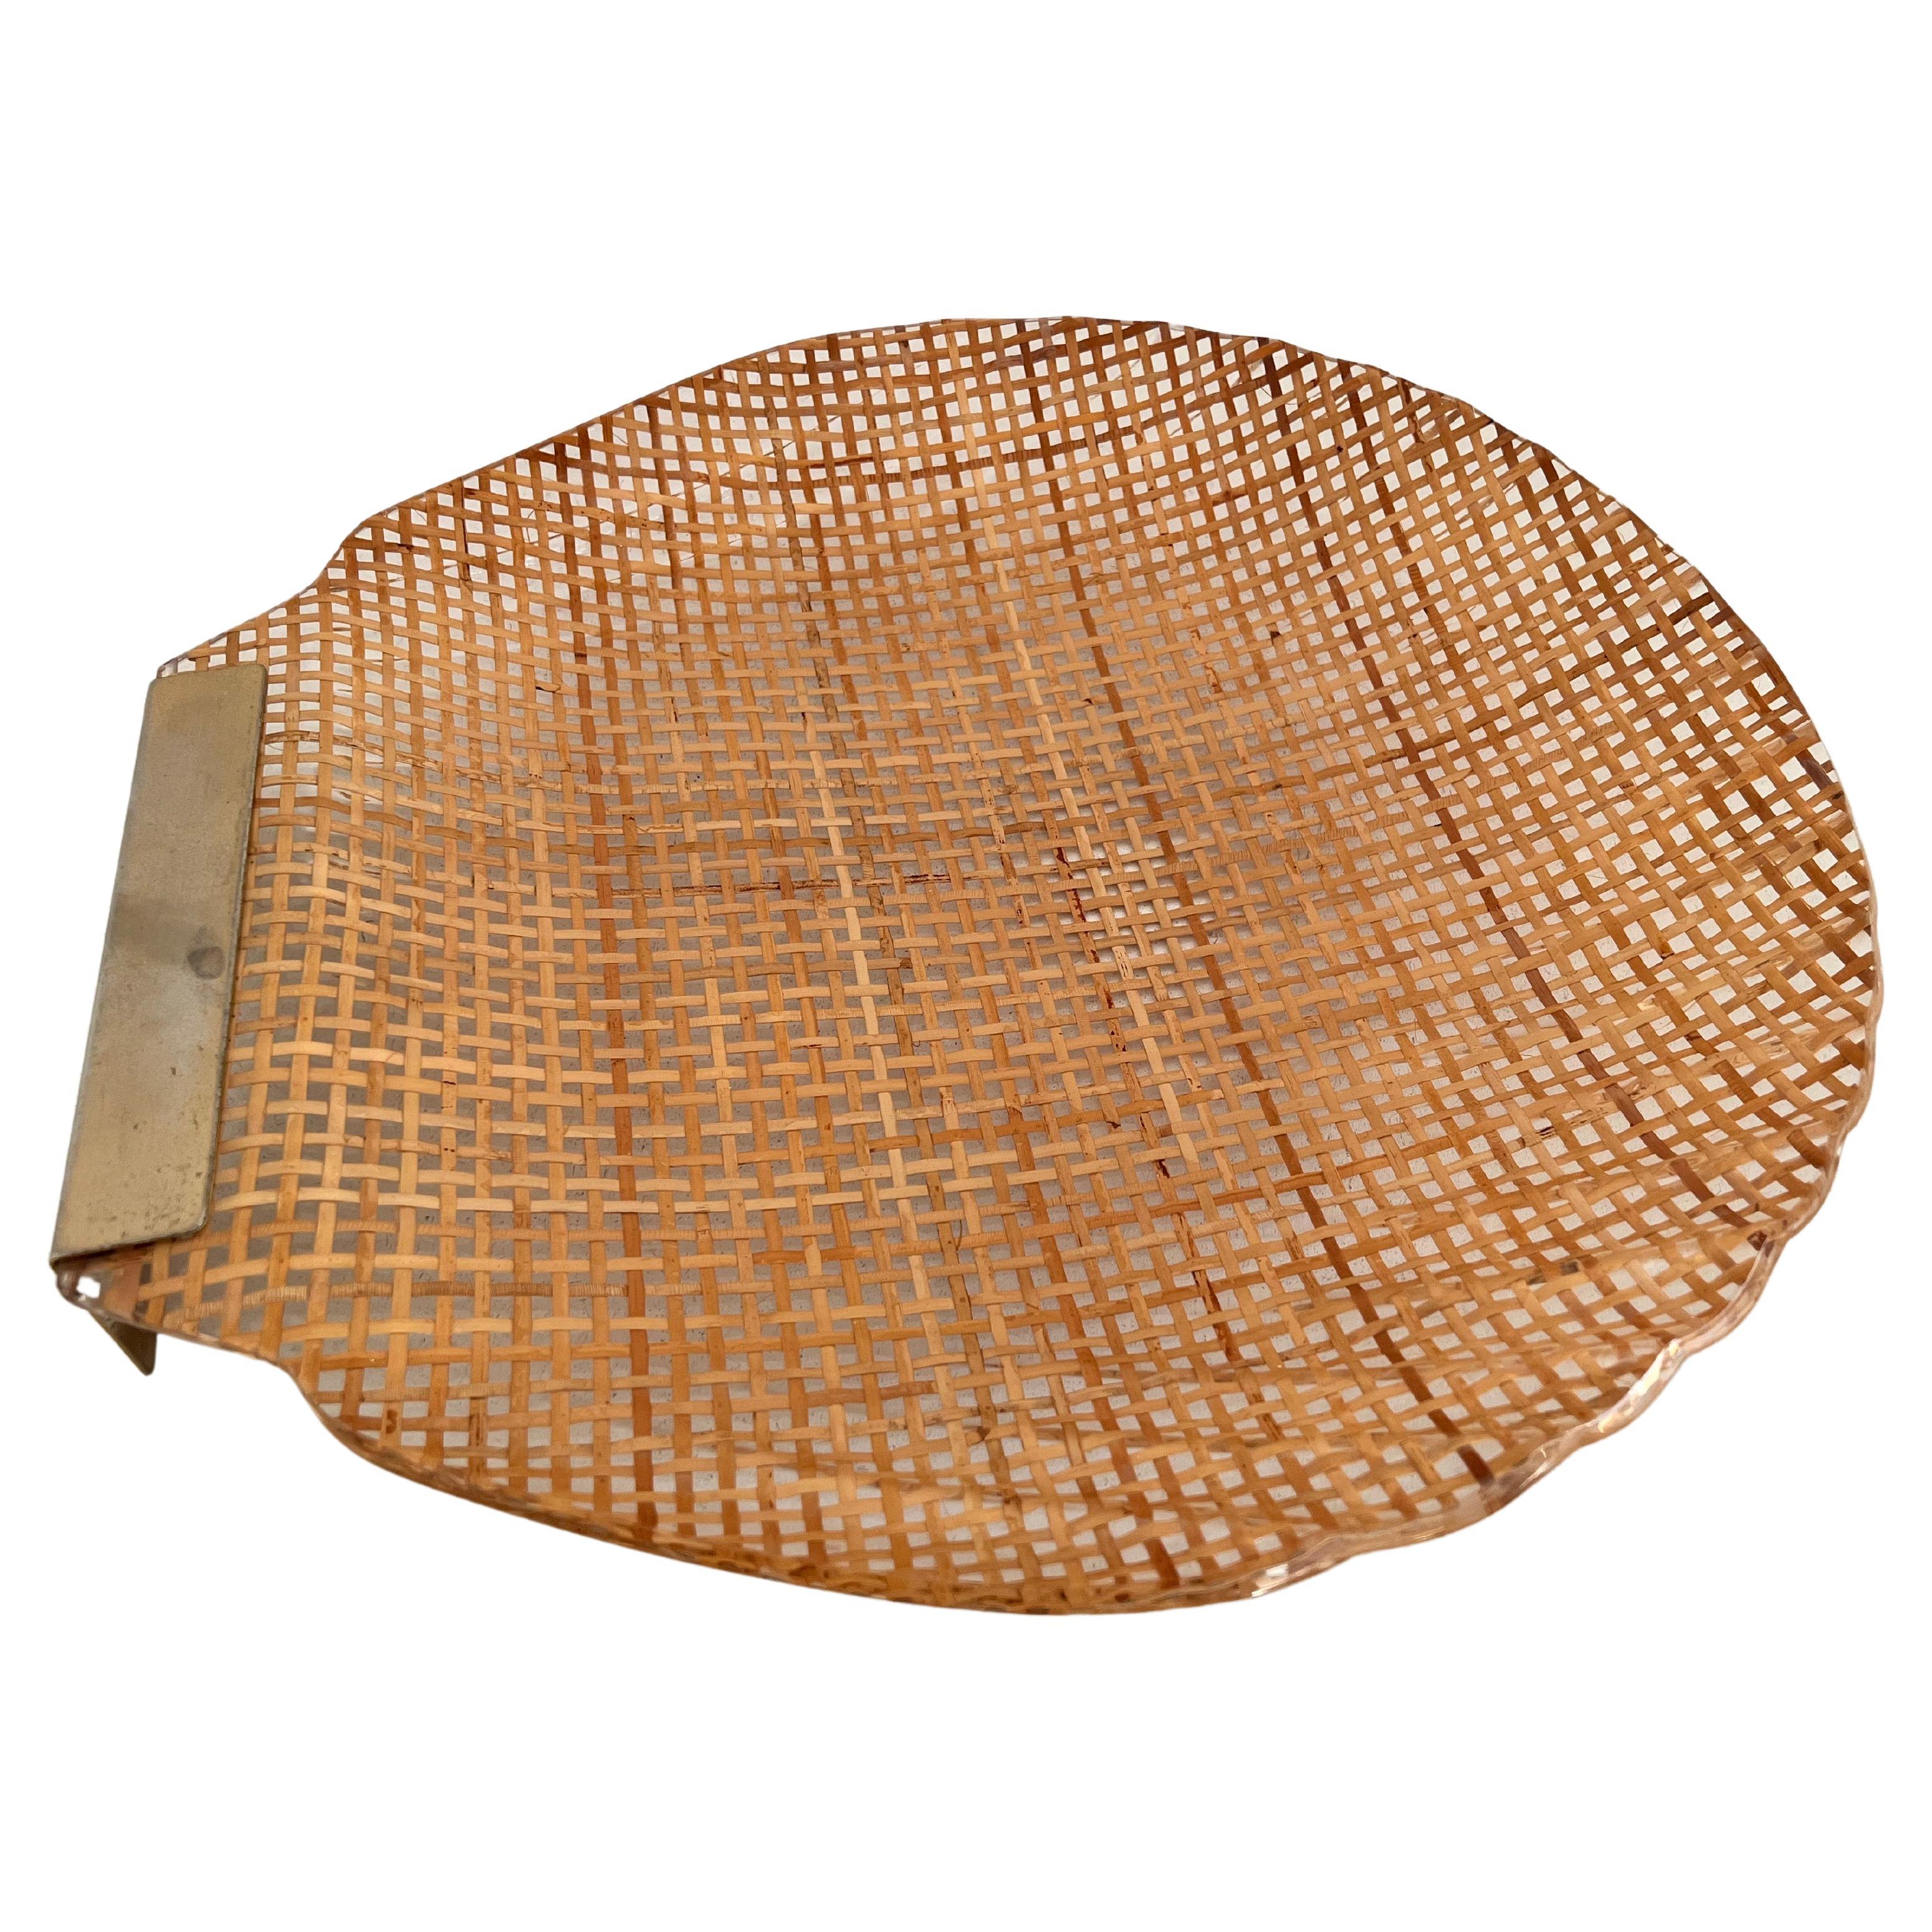 Gorgeous serving tray, in the shape of a shell, made of lucite, rattan and brass.
Made in Italy in the 1970s. 
Braided rattan is cast within the Lucite acrylic material. Beautiful workmanship.
The brass part is kept in original vintage version,